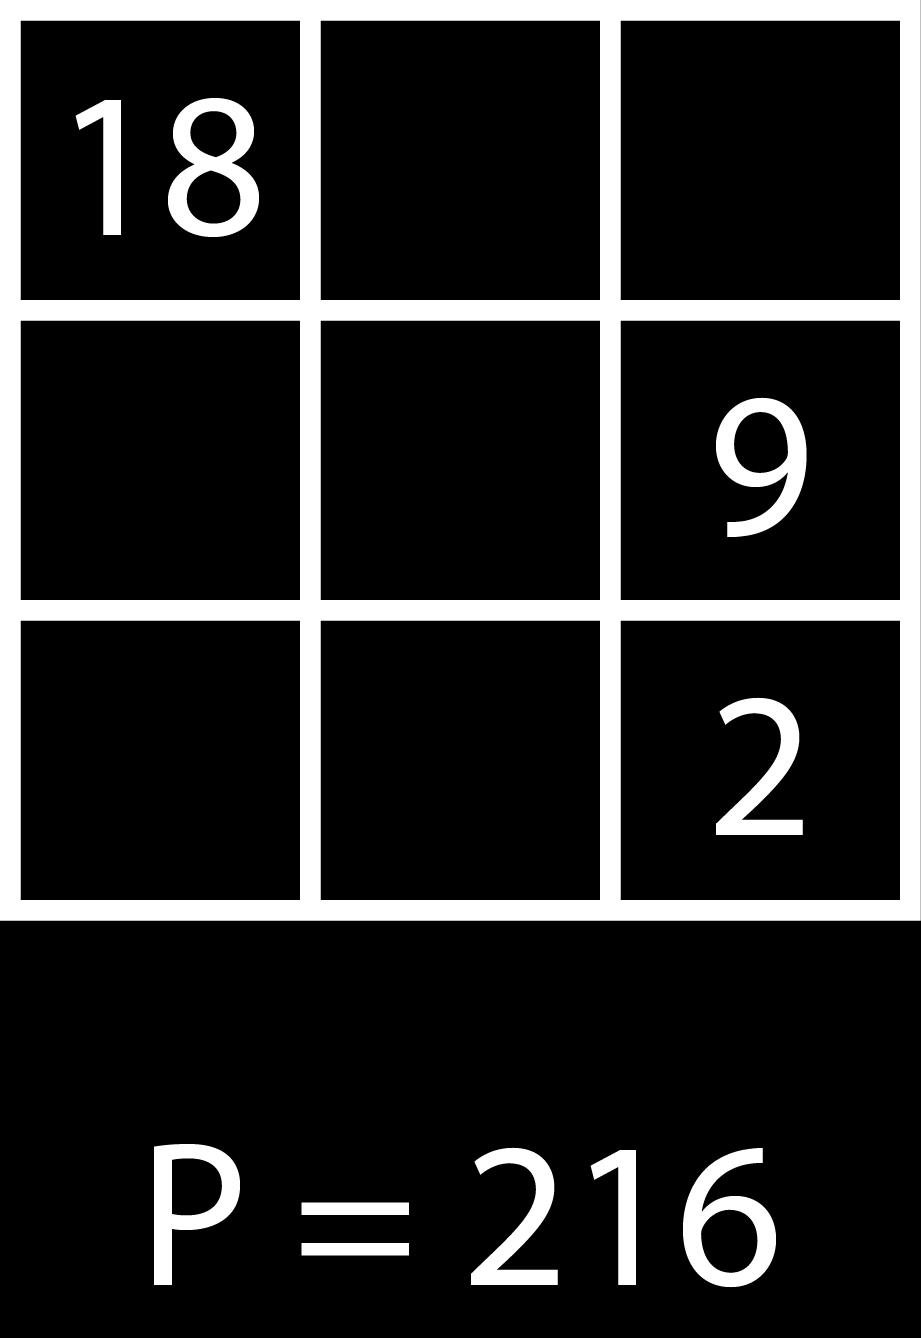 Exercise: Complete these magic squares.